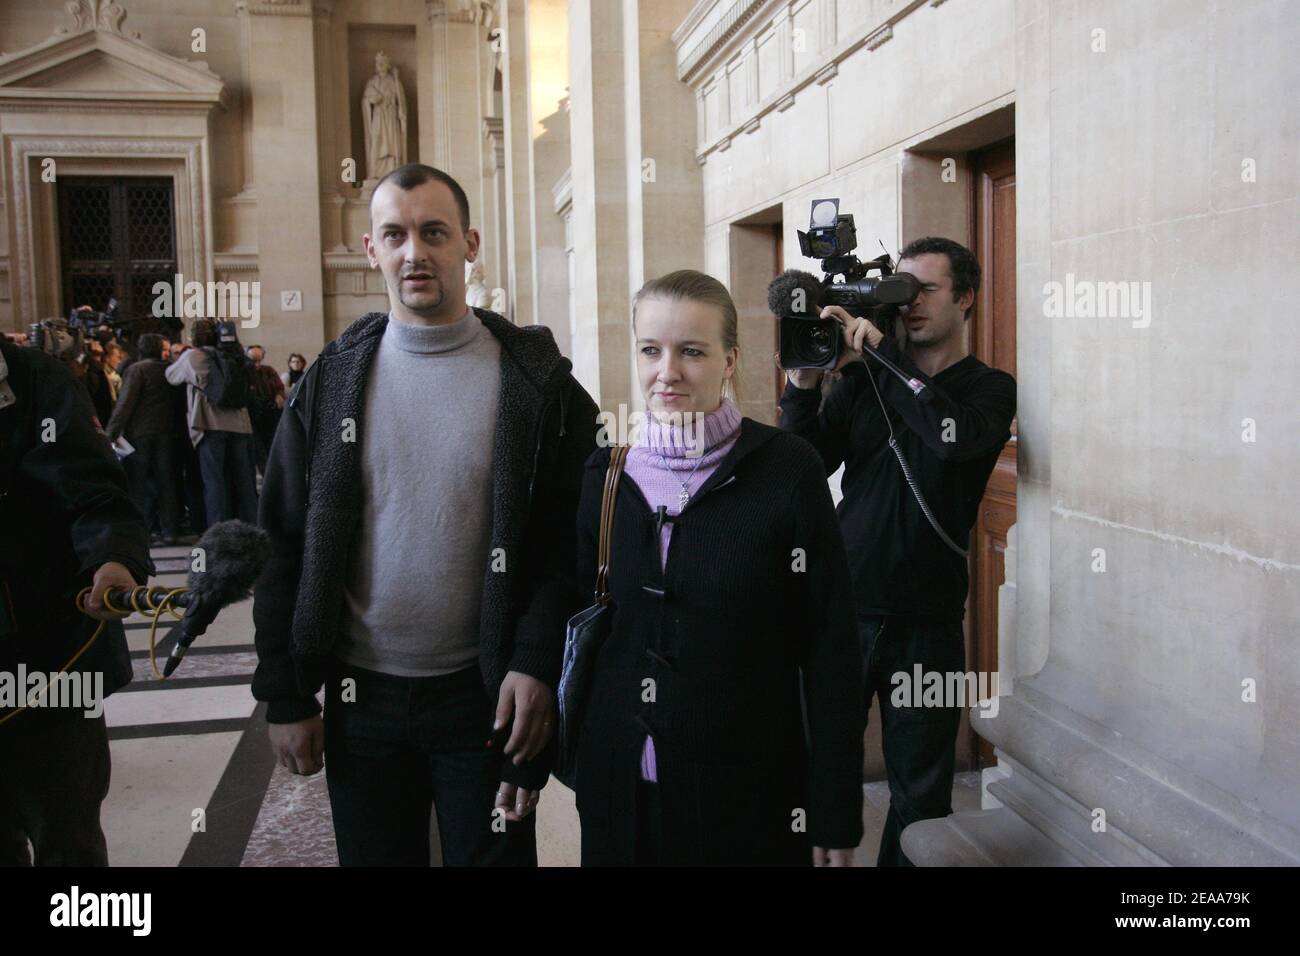 Franck and Sandrine Lavier arrive at the Paris courts for the appeal hearing in a child prostitution ring case November 3, 2005, in Paris, France. The trial of a prostitution ring in Outreau, northern France, caused uproar last year when a court convicted 10 of 17 defendants even though the main accuser had withdrawn her charges against most of them. The opening of the trial has been deferred until Monday November 7, 2005 because Thierry Dausque is hospitalized. Photo by Mousse/ABACAPRESS.COM Stock Photo